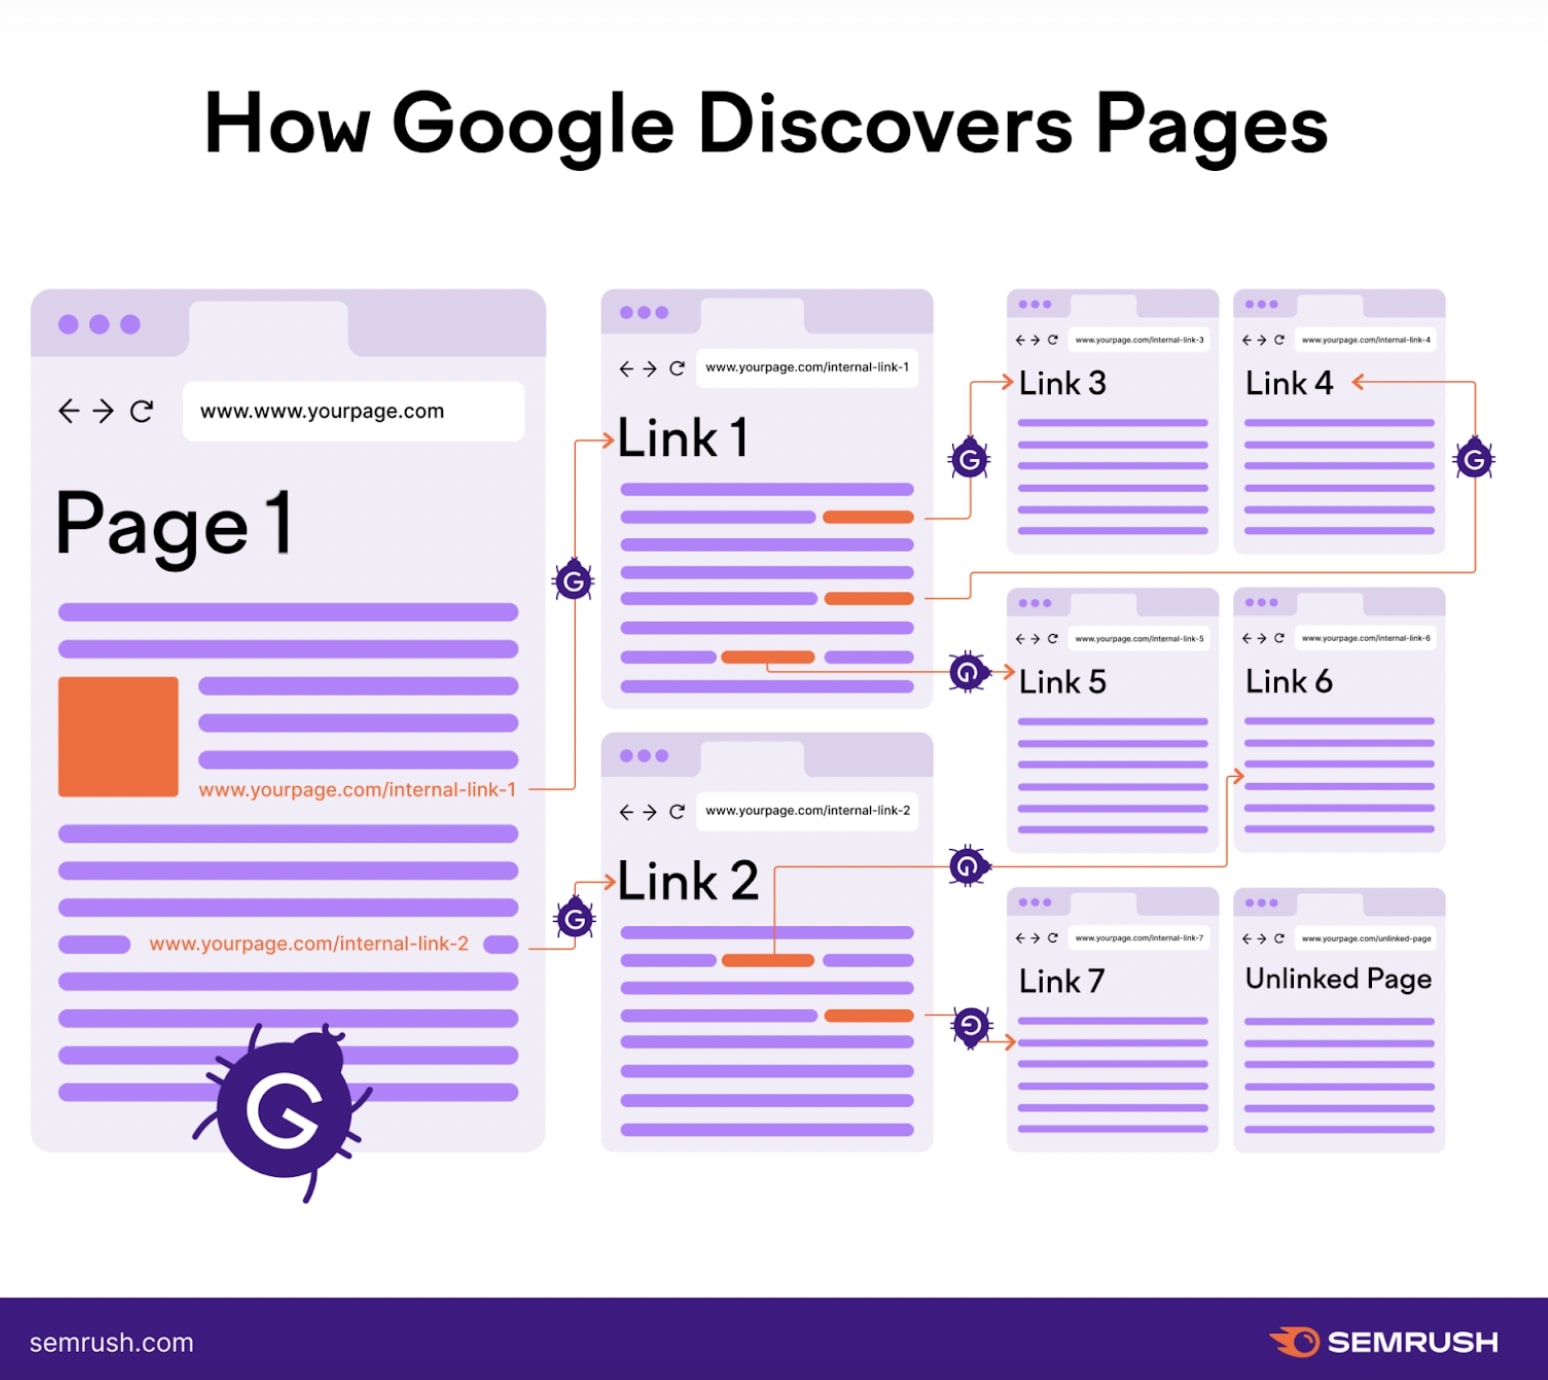 How Google discovers pages